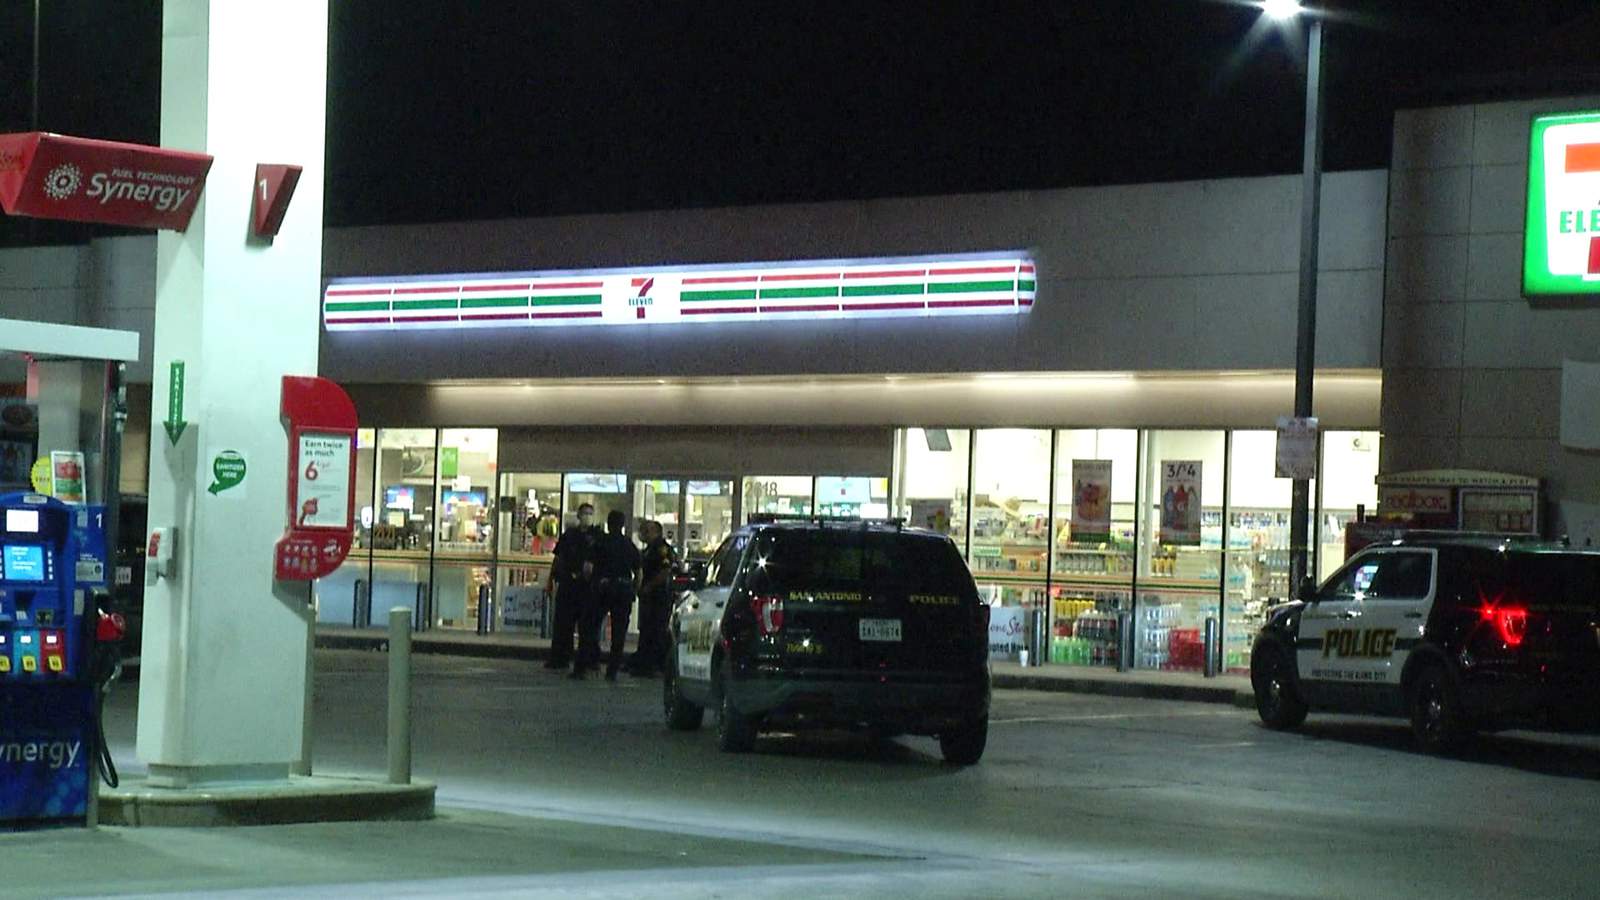 Men brandish gun, fire shot in air during 7-Eleven robbery, police say